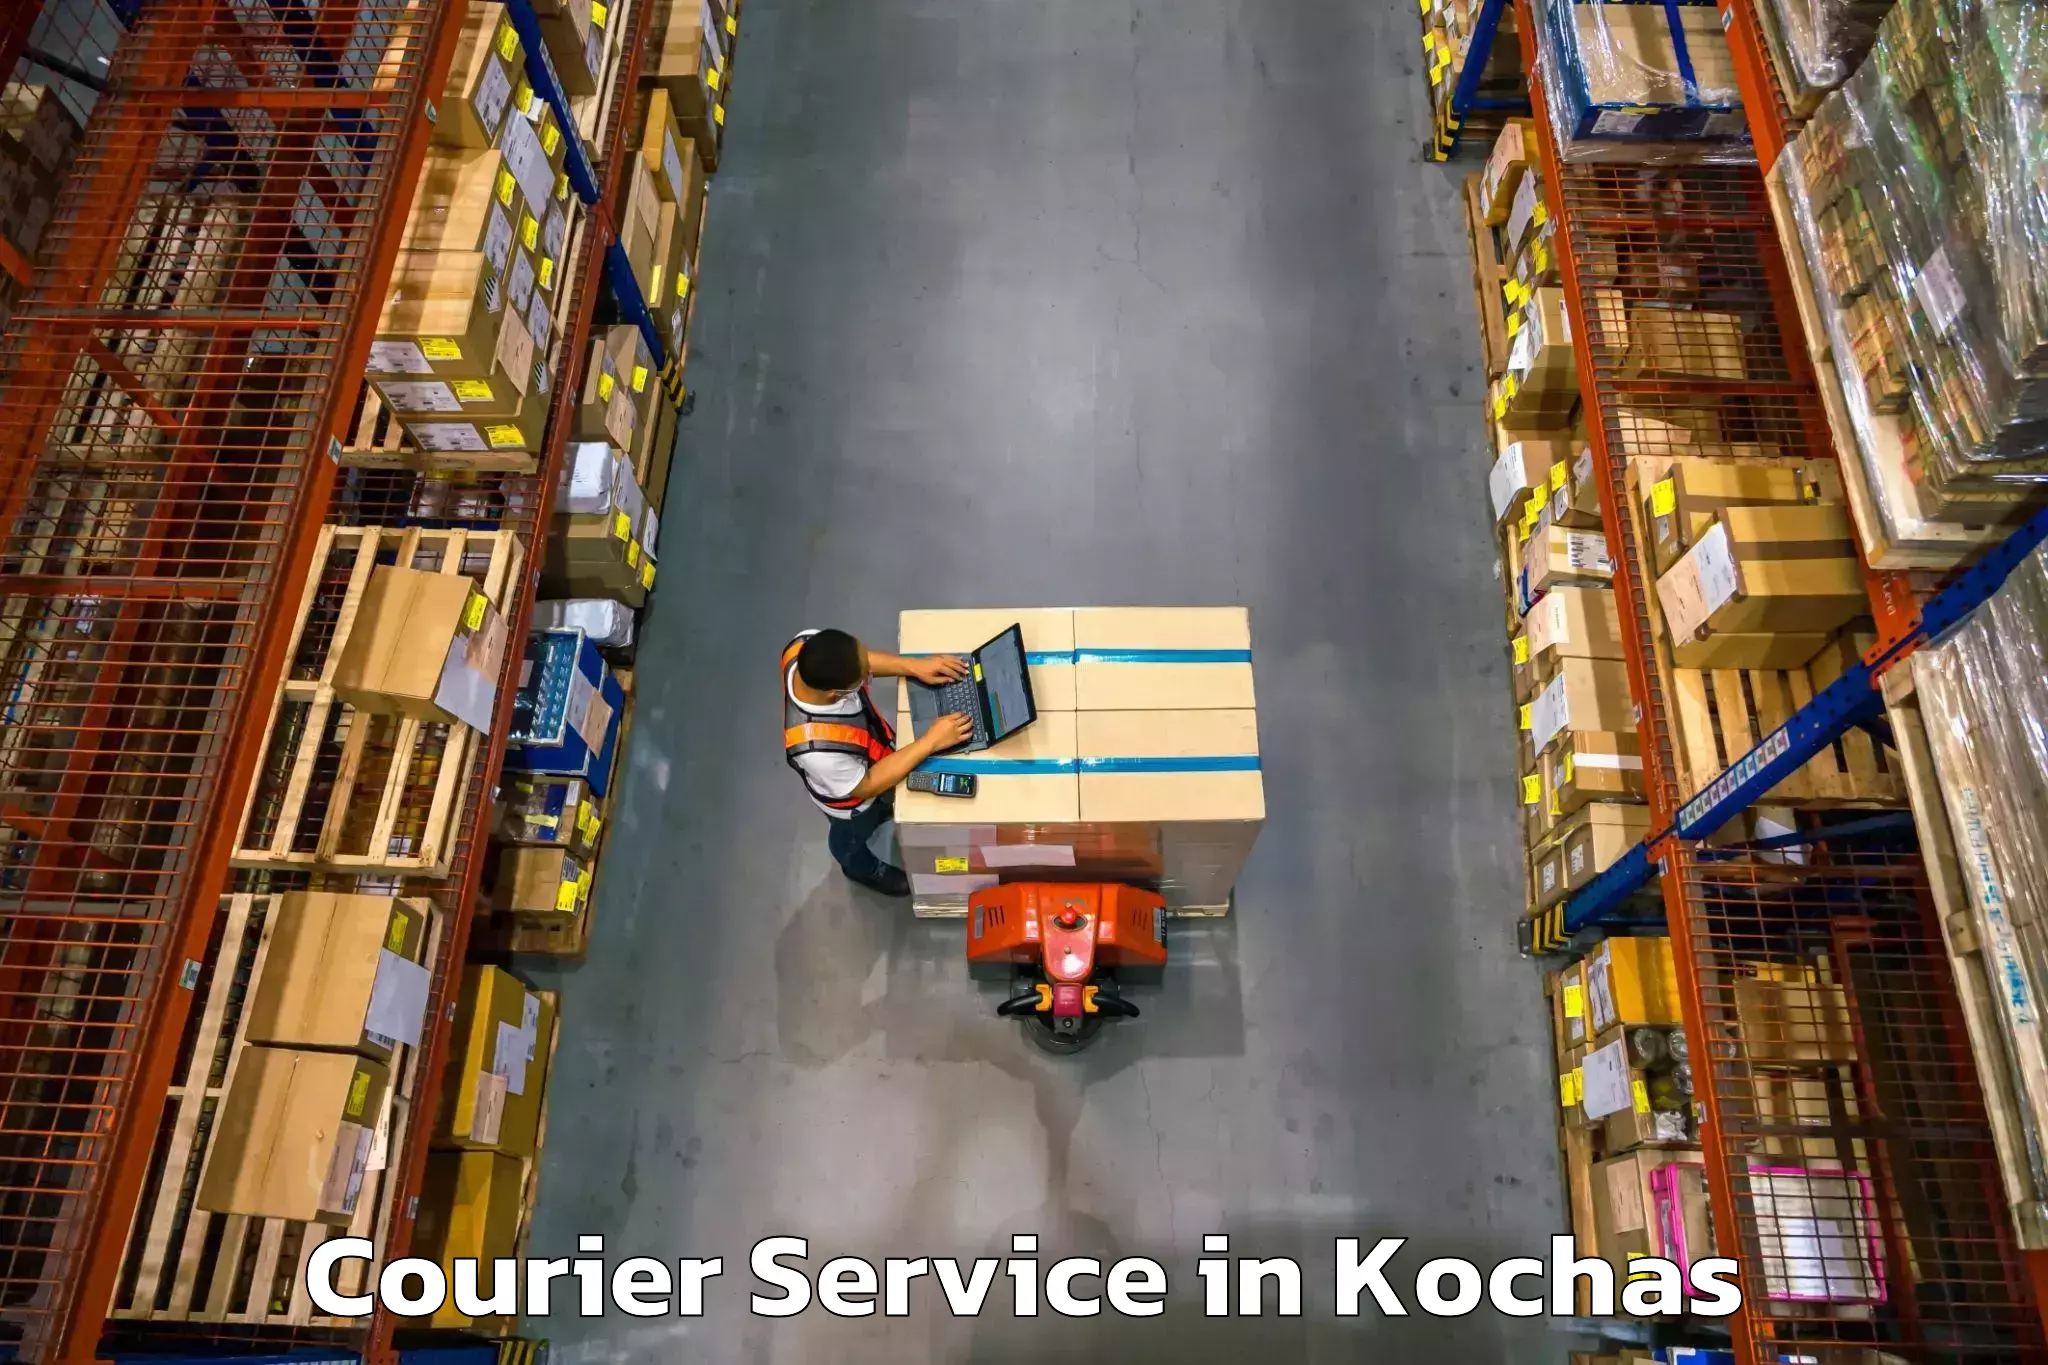 24-hour courier services in Kochas